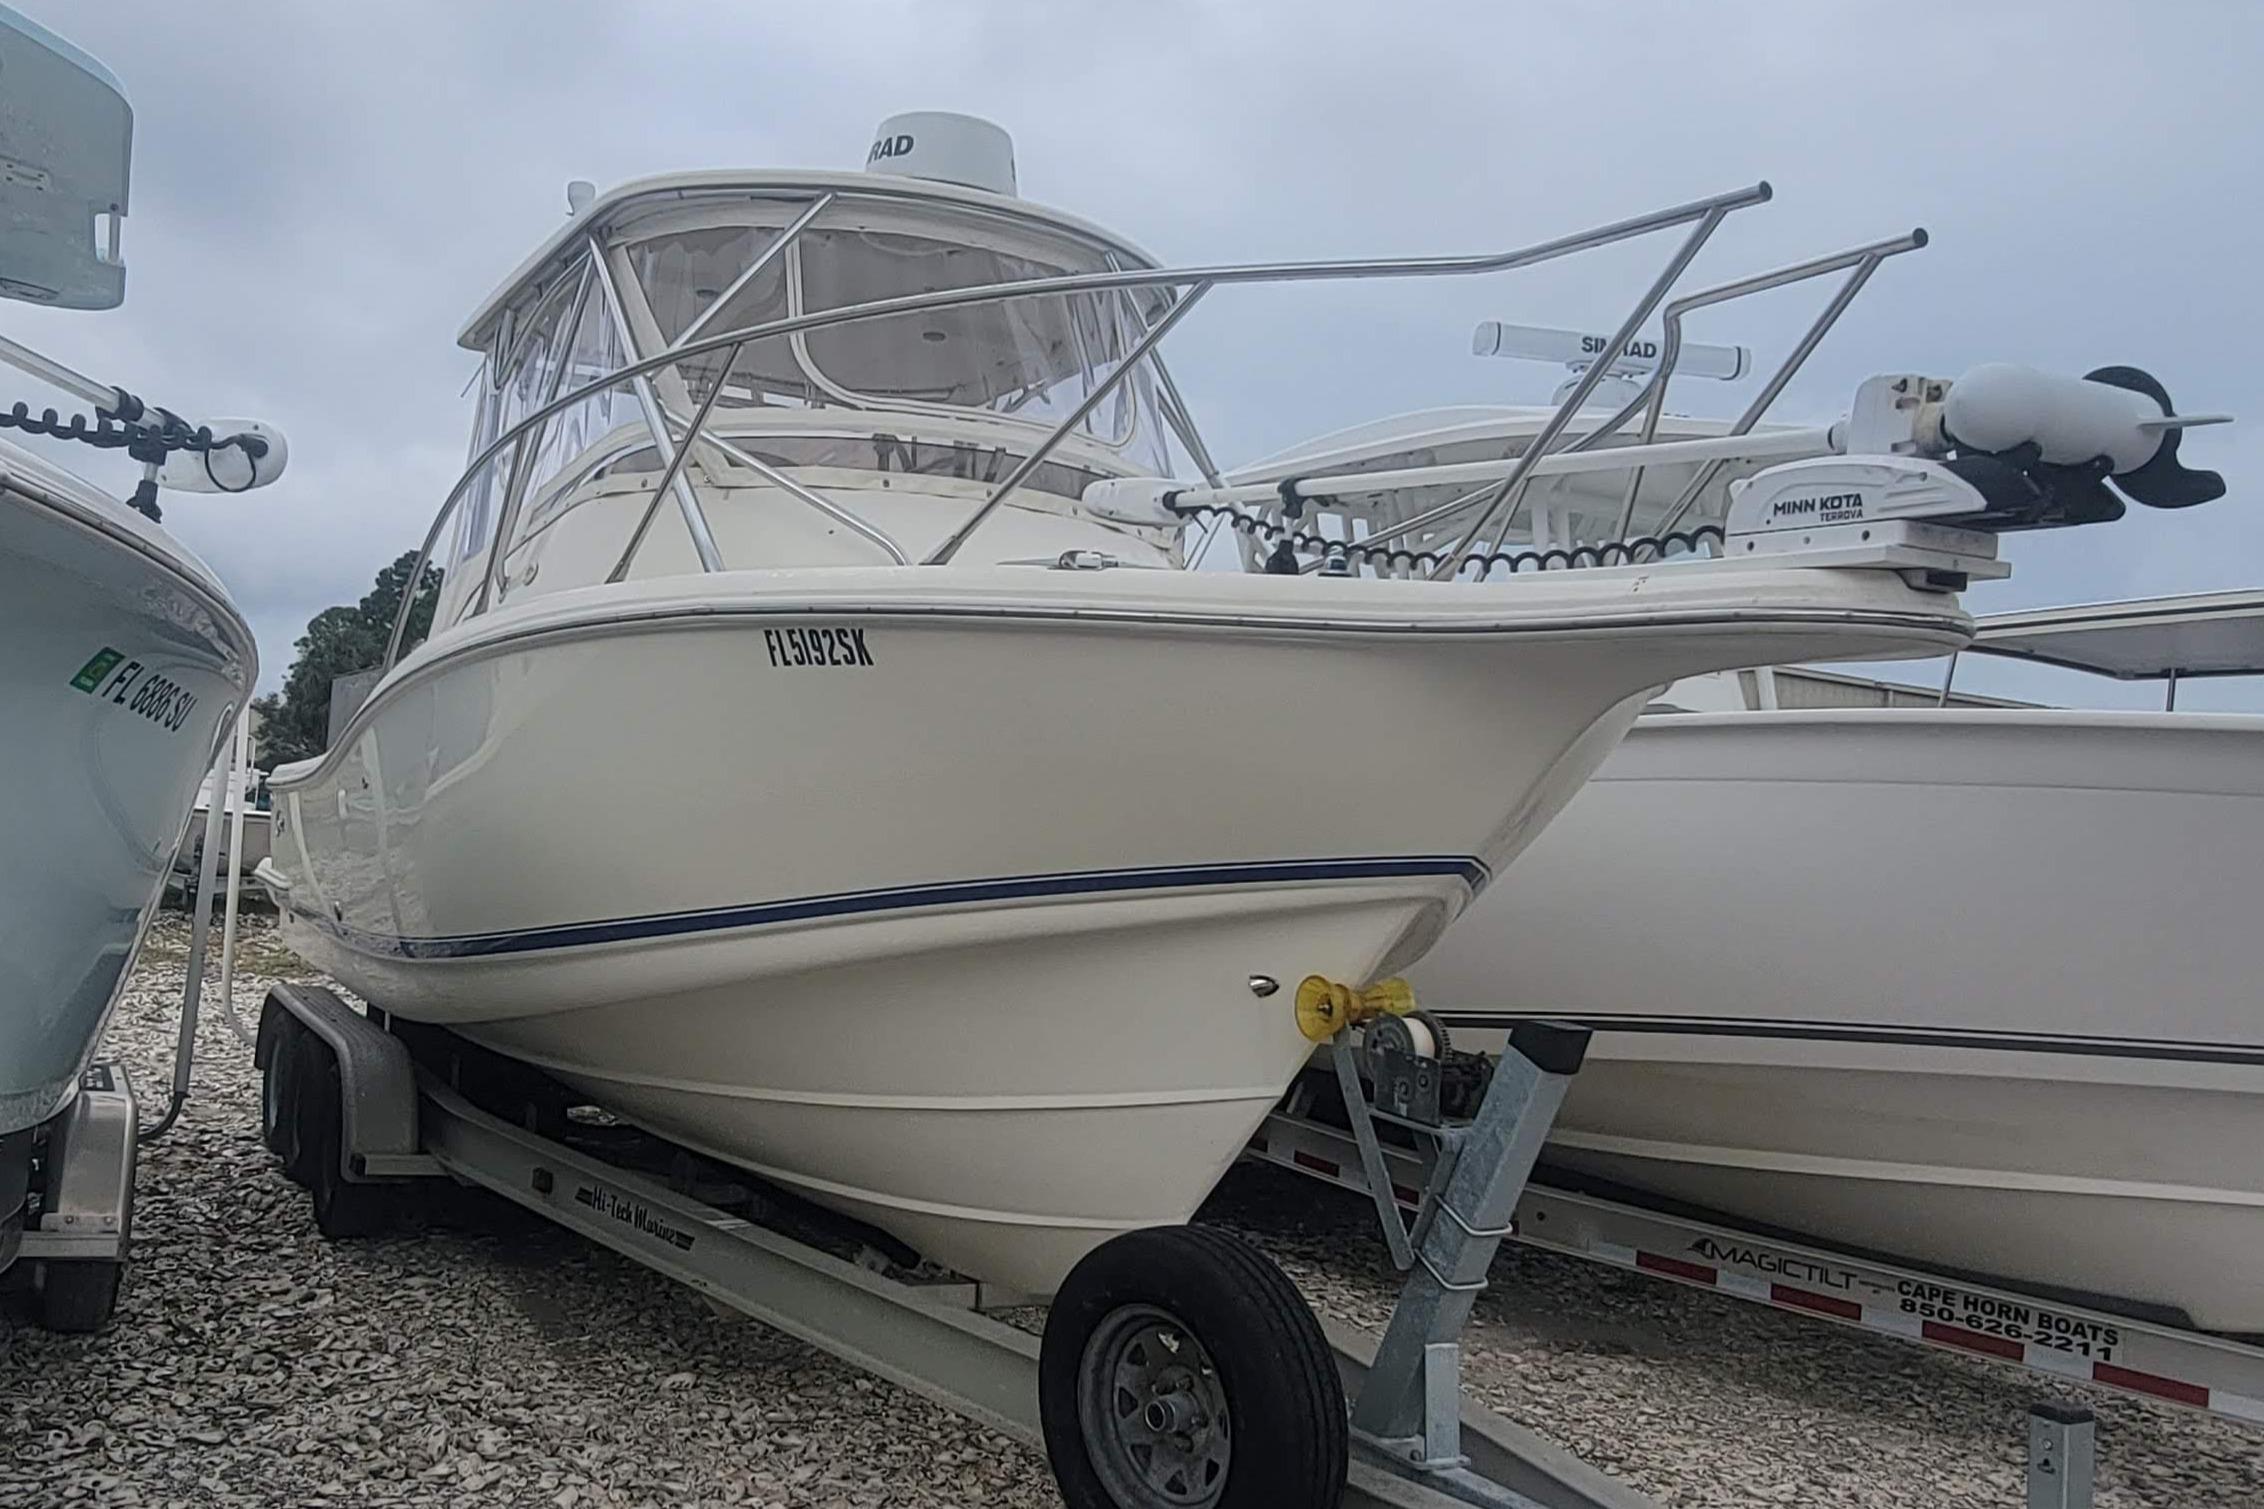 2001 Scout 280 Abaco